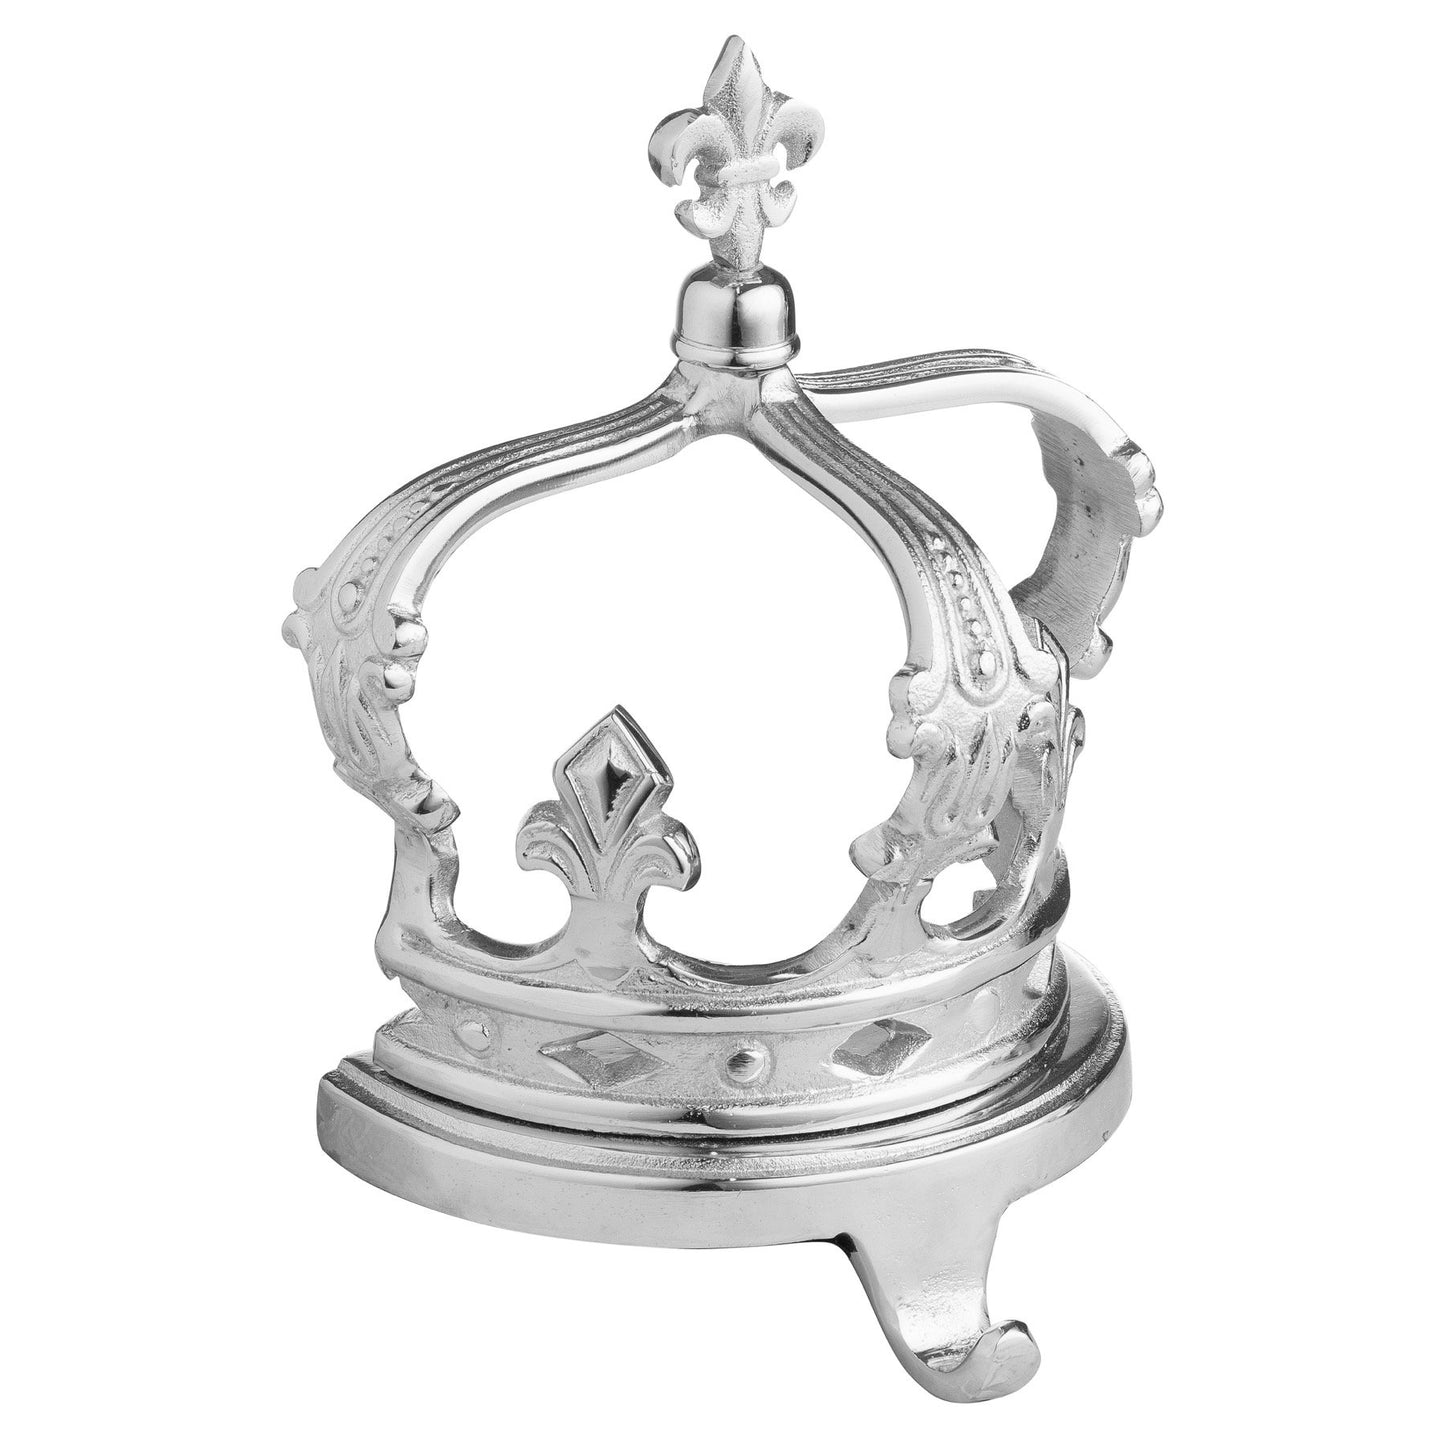 The Queens Crown Nickel Stocking Holder